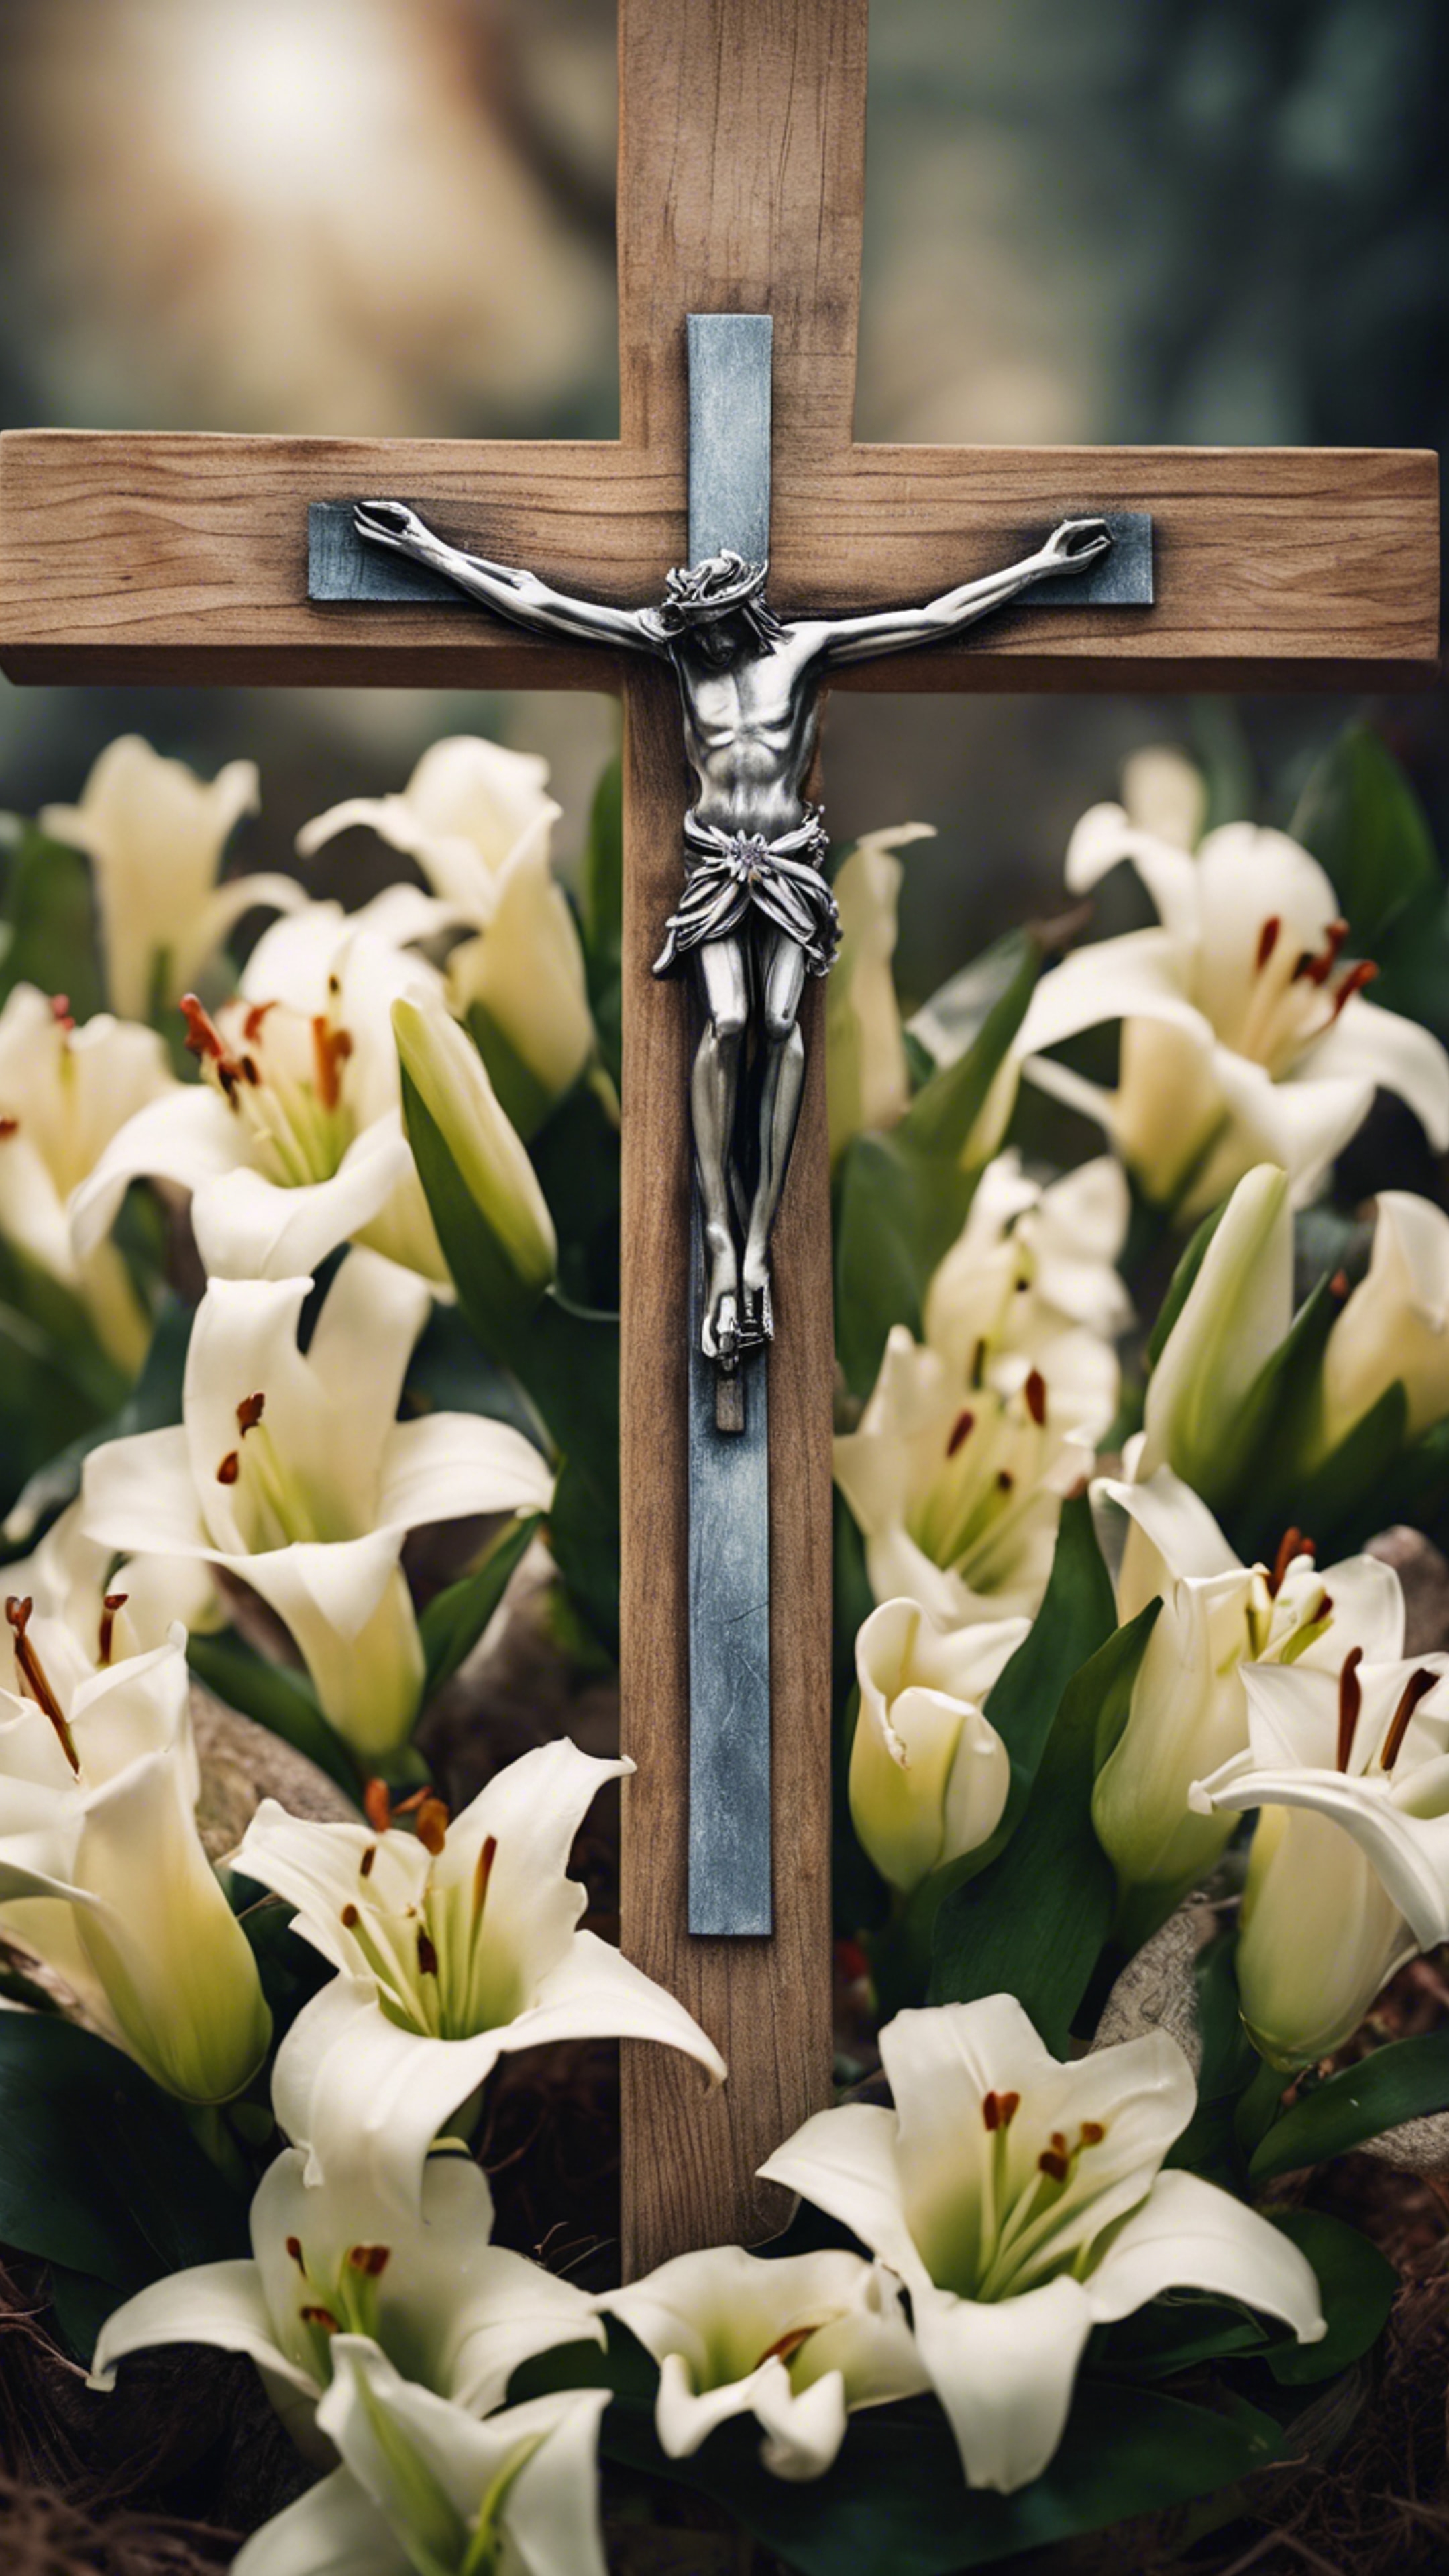 A simple wooden cross holding a crown of thorns, nestled amongst an array of blooming Easter lilies. วอลล์เปเปอร์[540a2c80d21742b6ad6b]